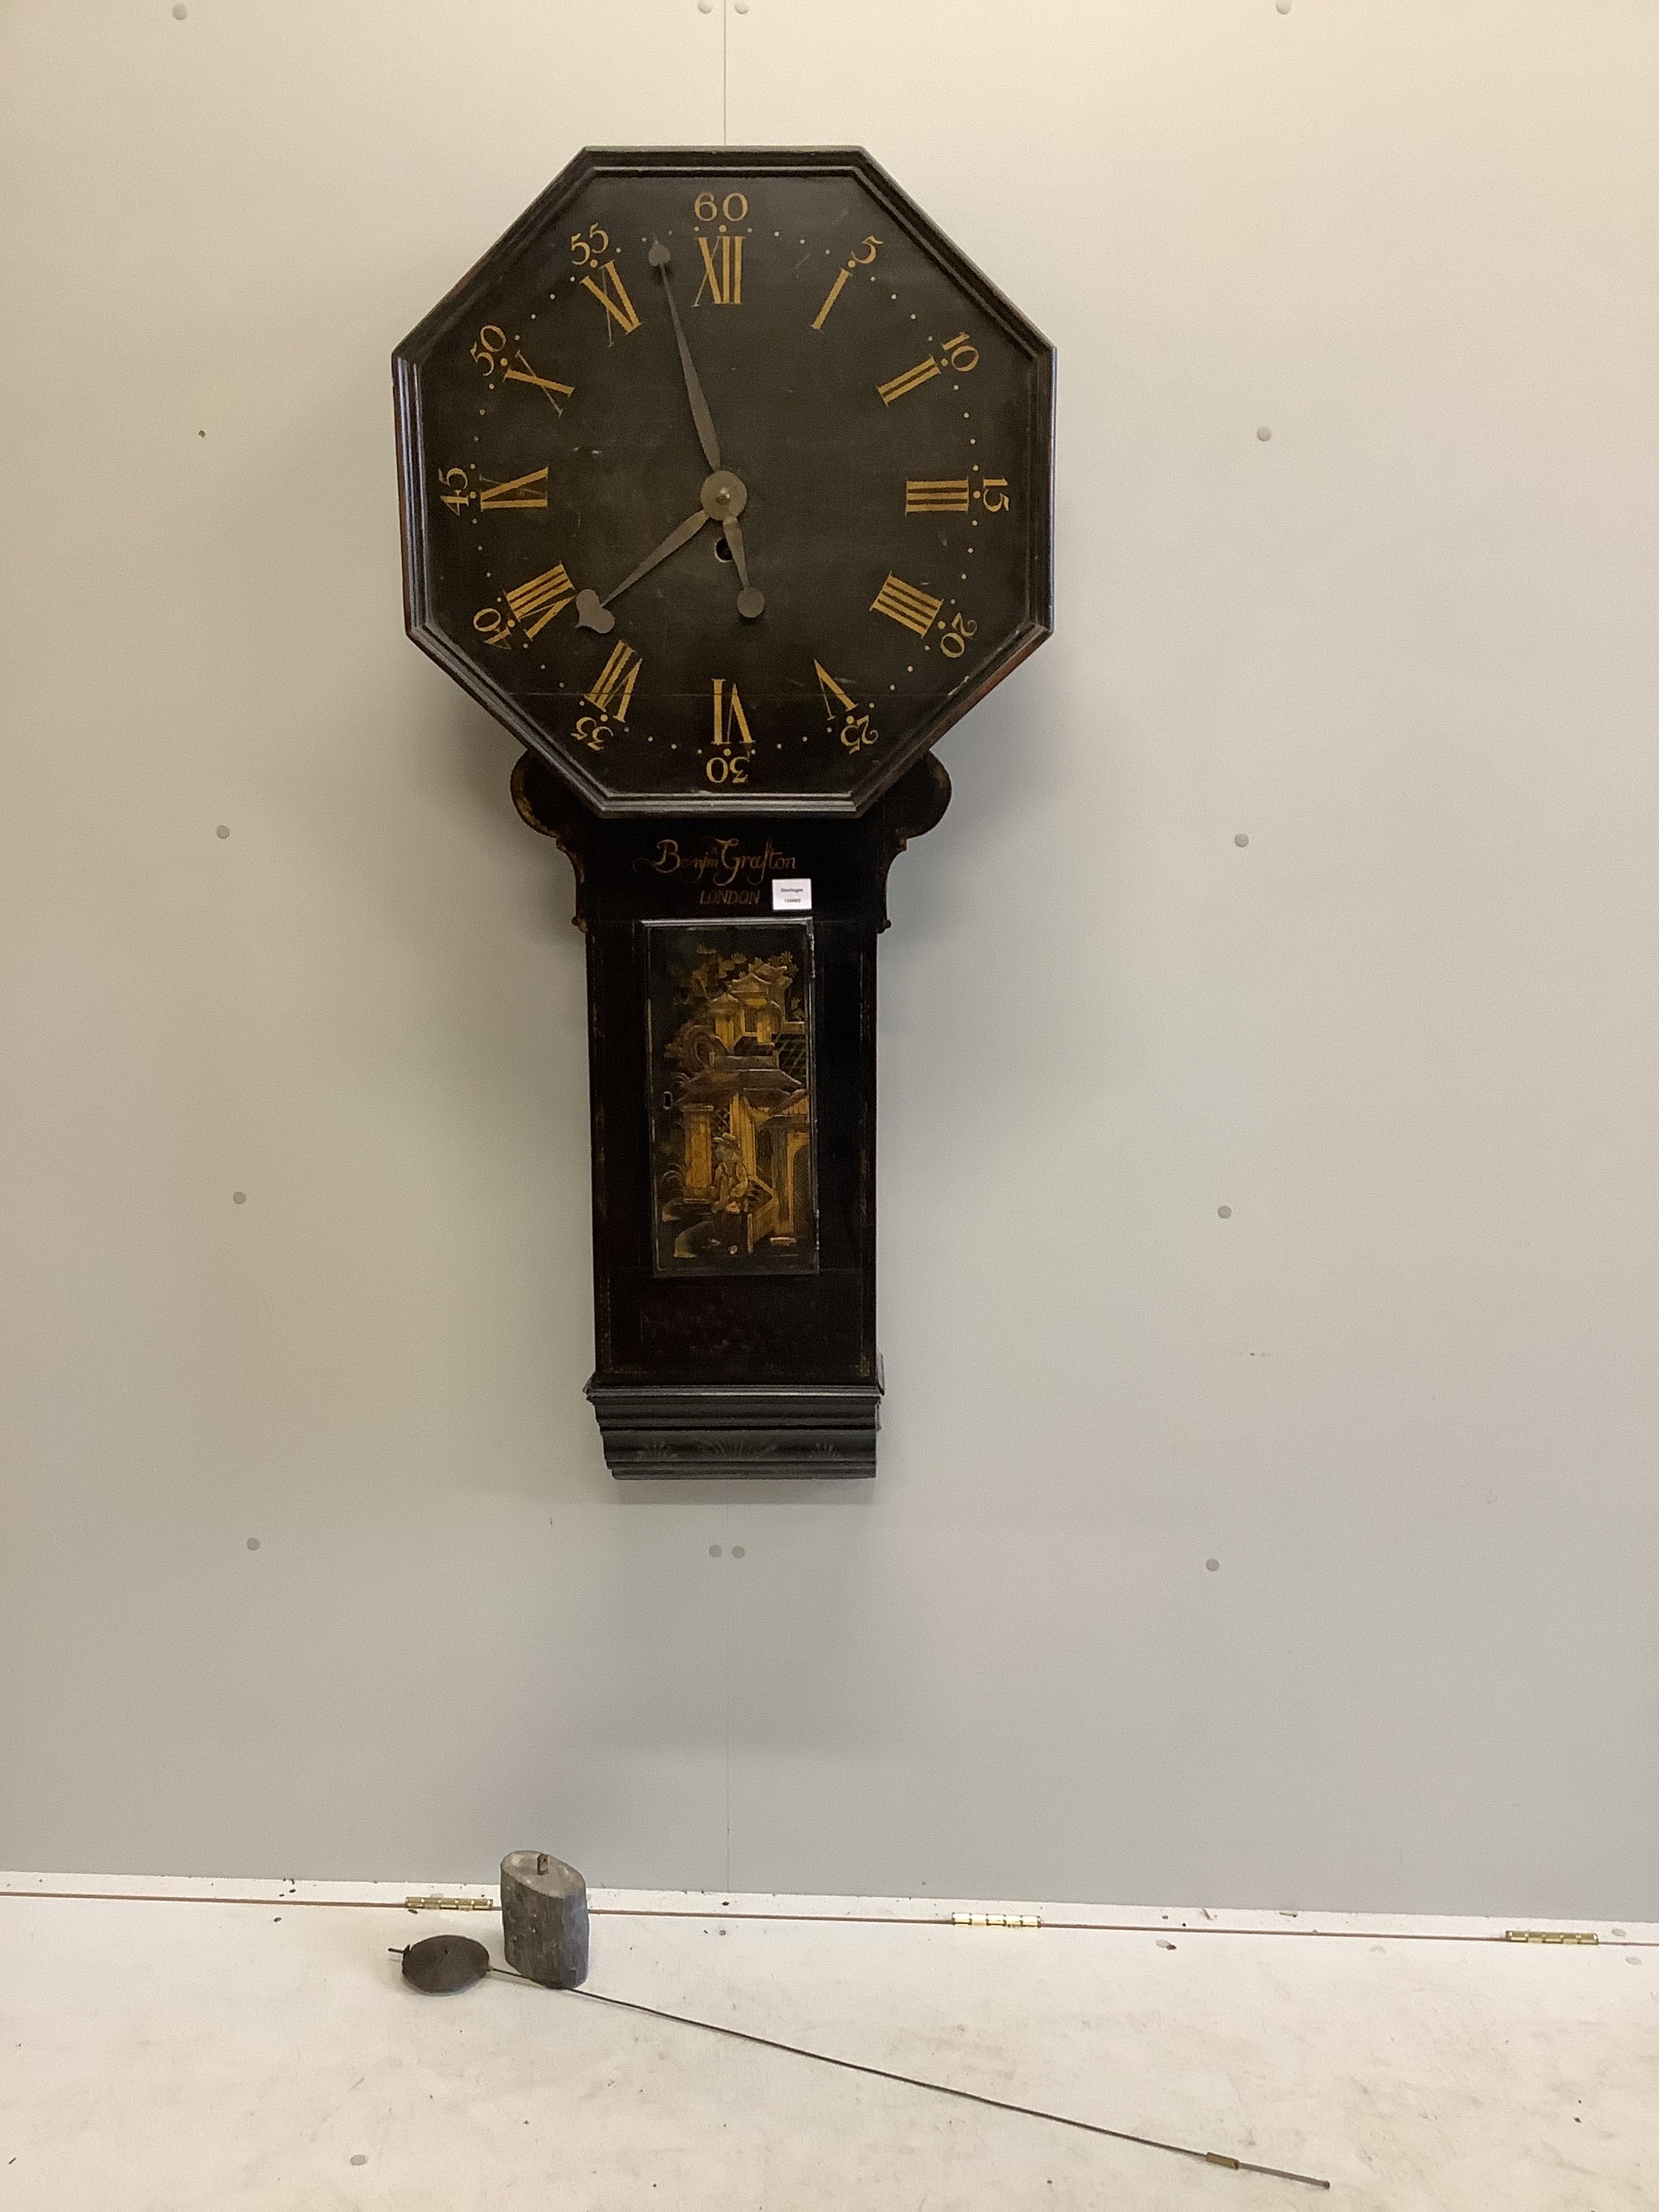 Benjamin Grafton, London, a chinoiserie lacquer tavern clock with octagonal dial, width 66cm, height 150cm